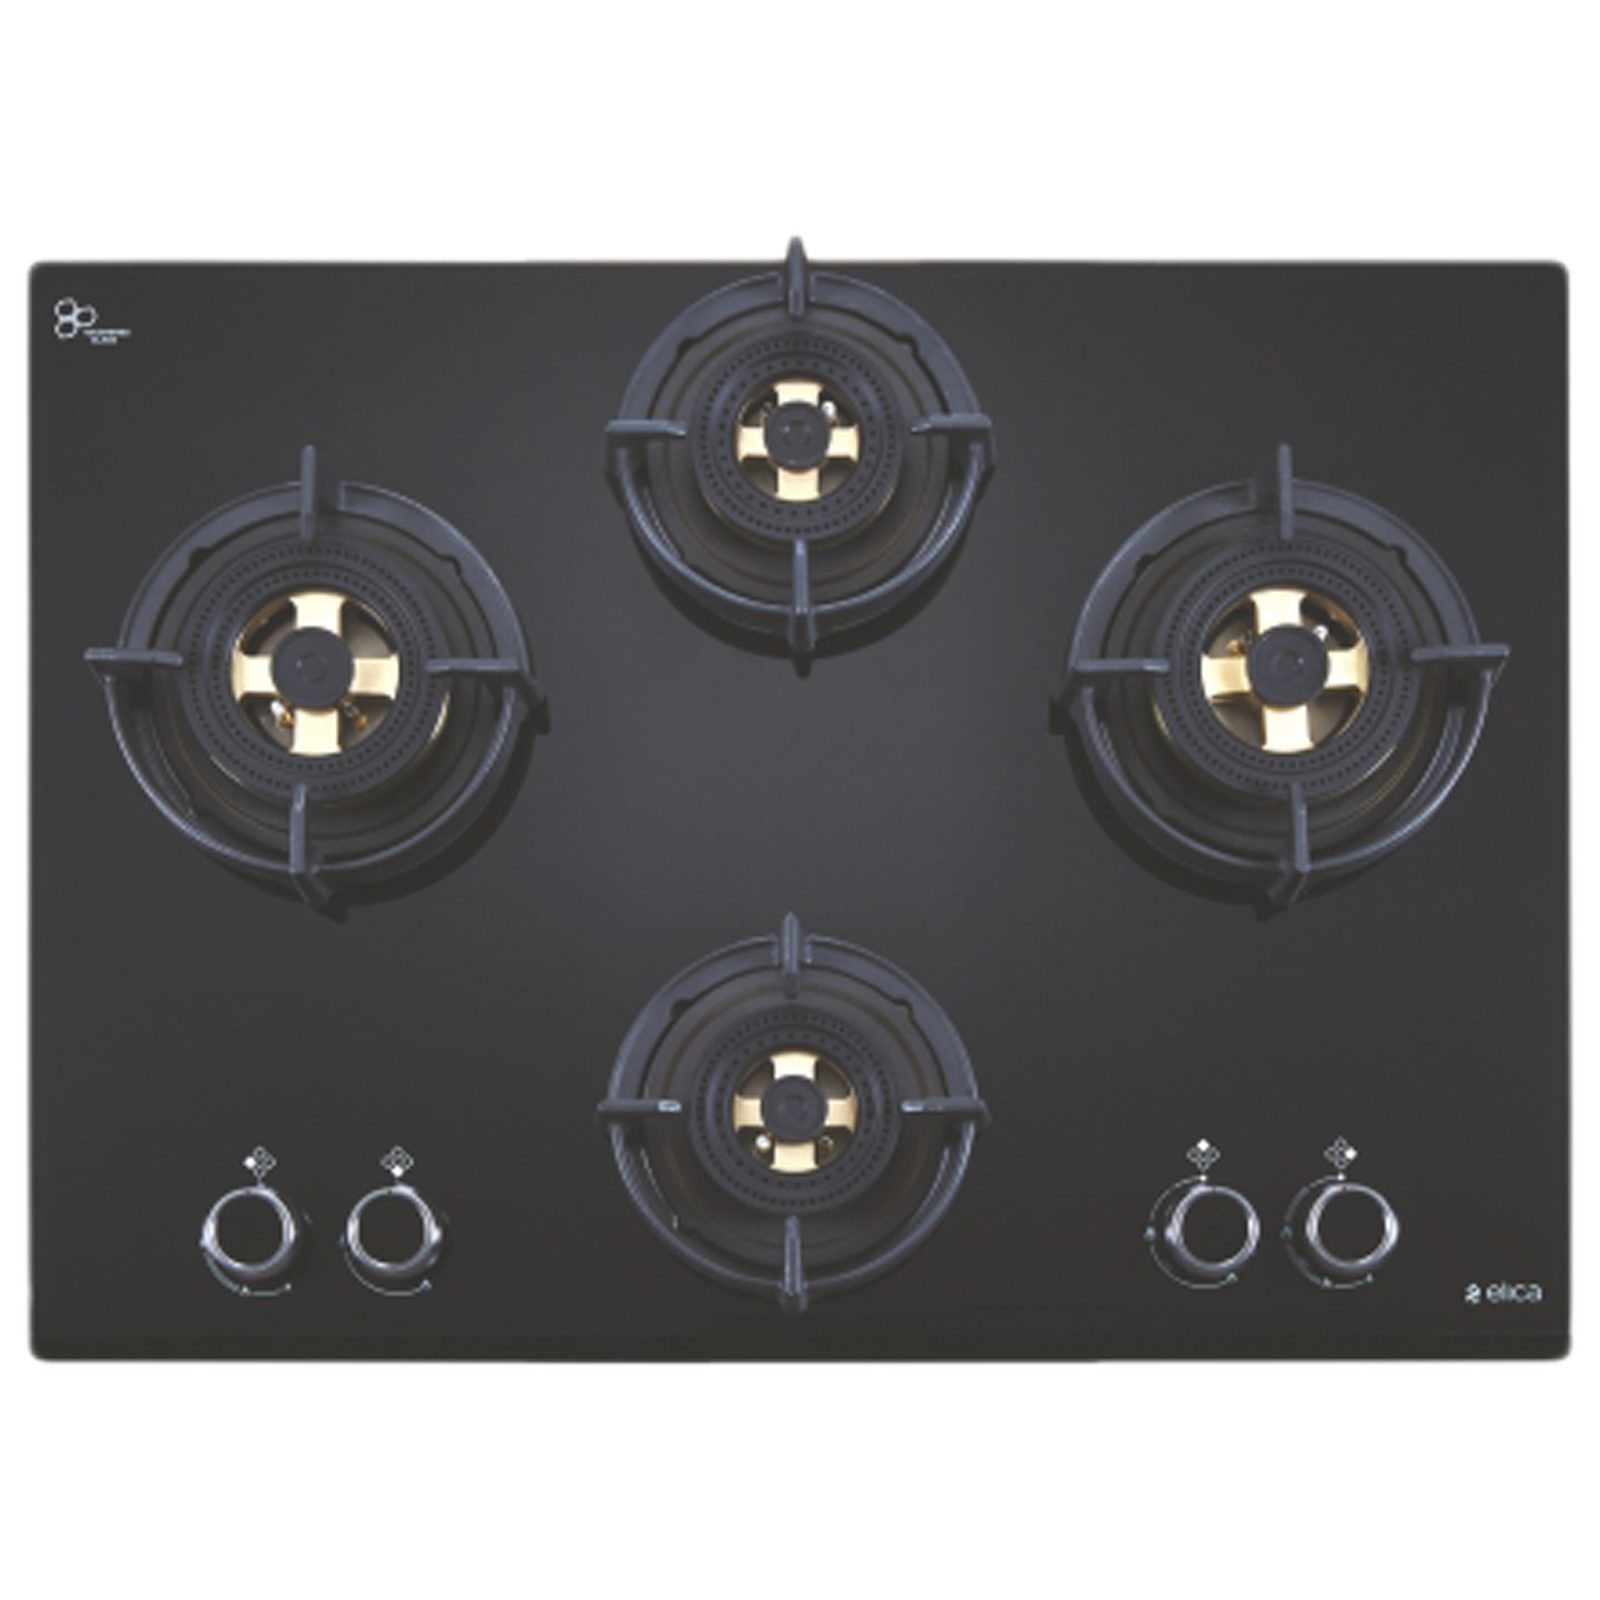 Elica DFS FB MFC Series 4 Burner Built-in Gas Hob (Automatic Ignition, 3413, Black)_1